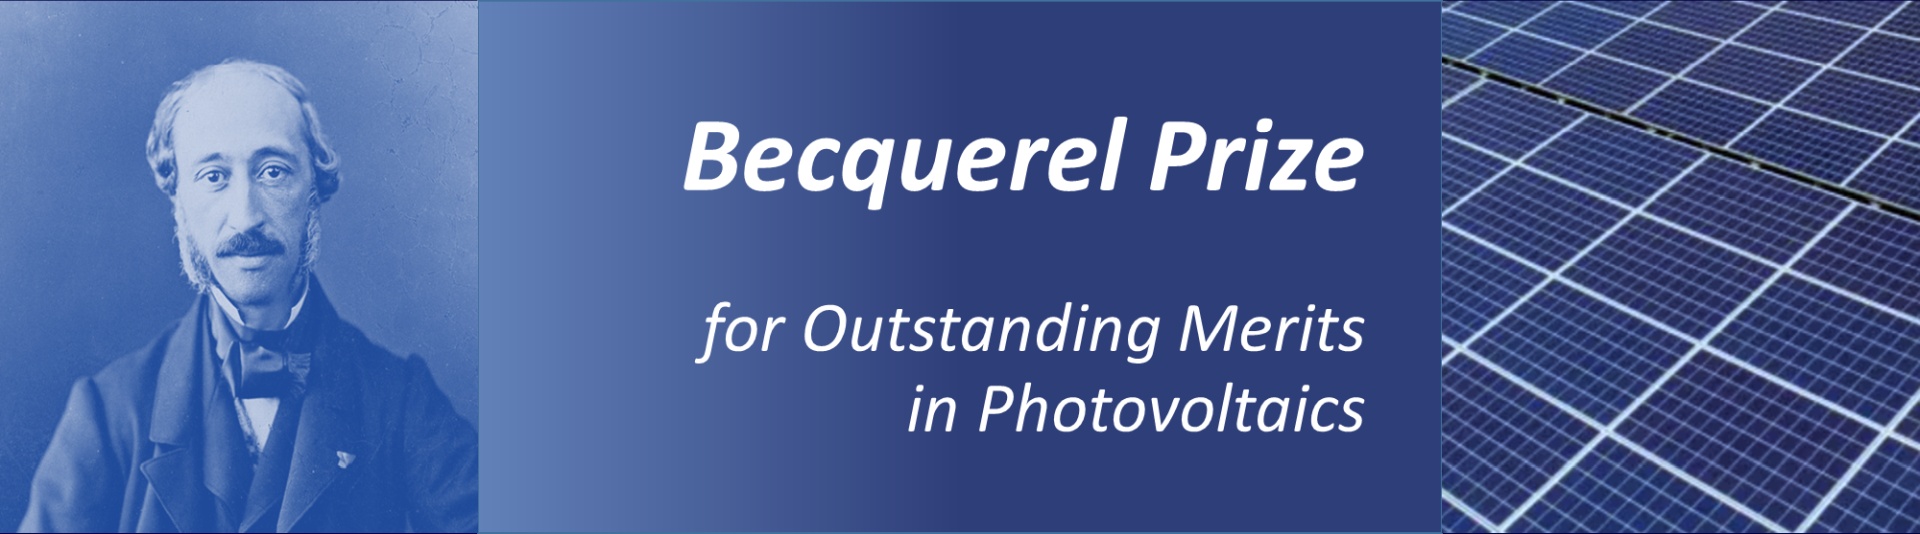 Becquerel Prize for Outstanding Merits in Photovoltaics